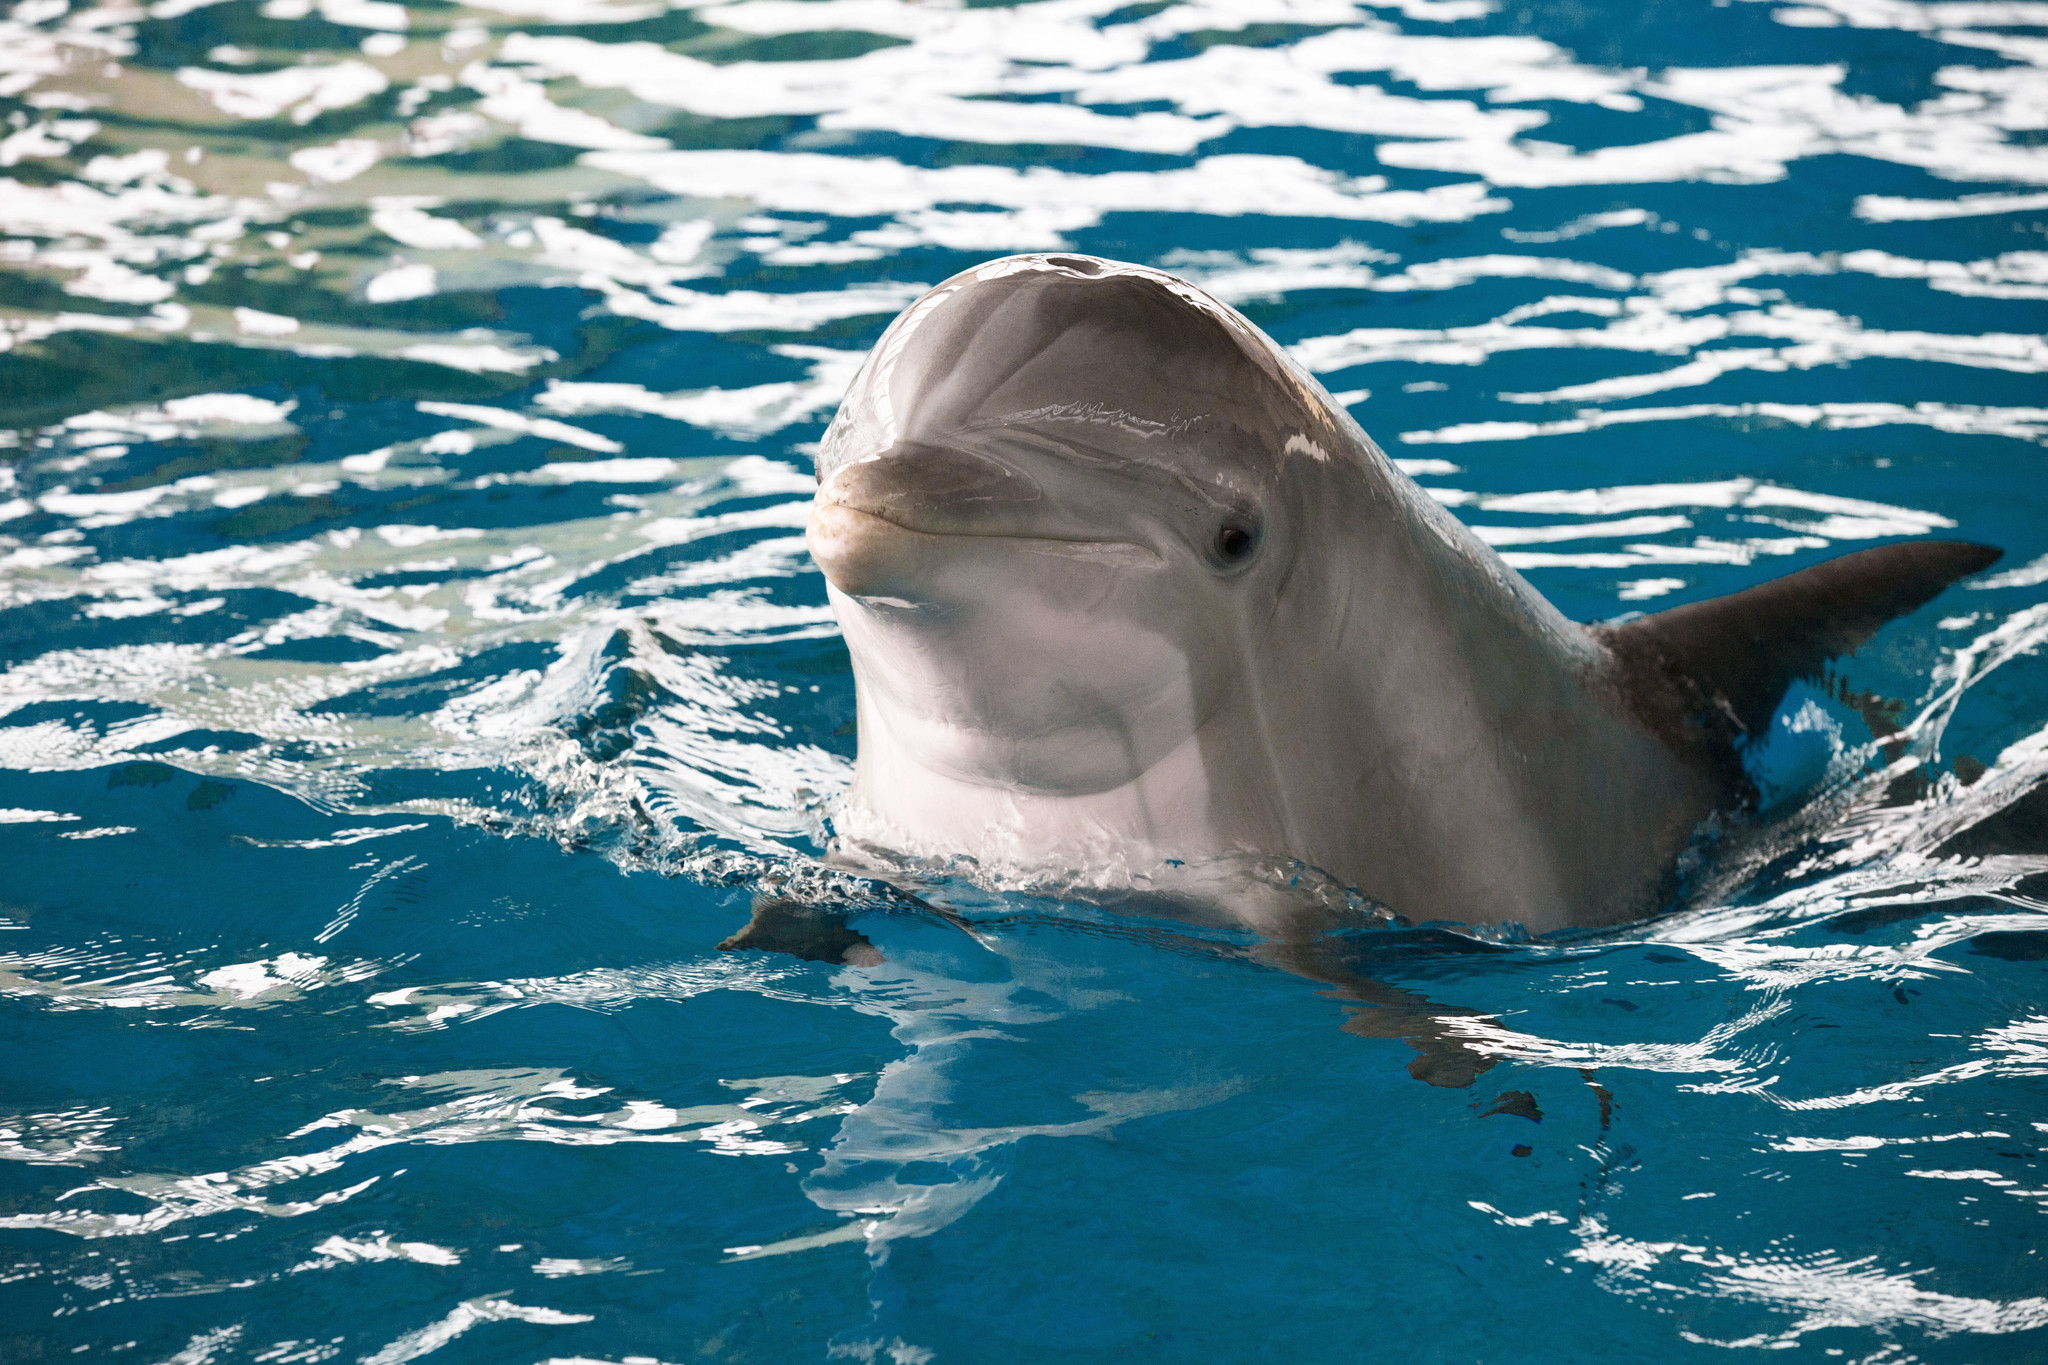 National Aquarium: The time is right to move our dolphins to a seaside sanctuary ...